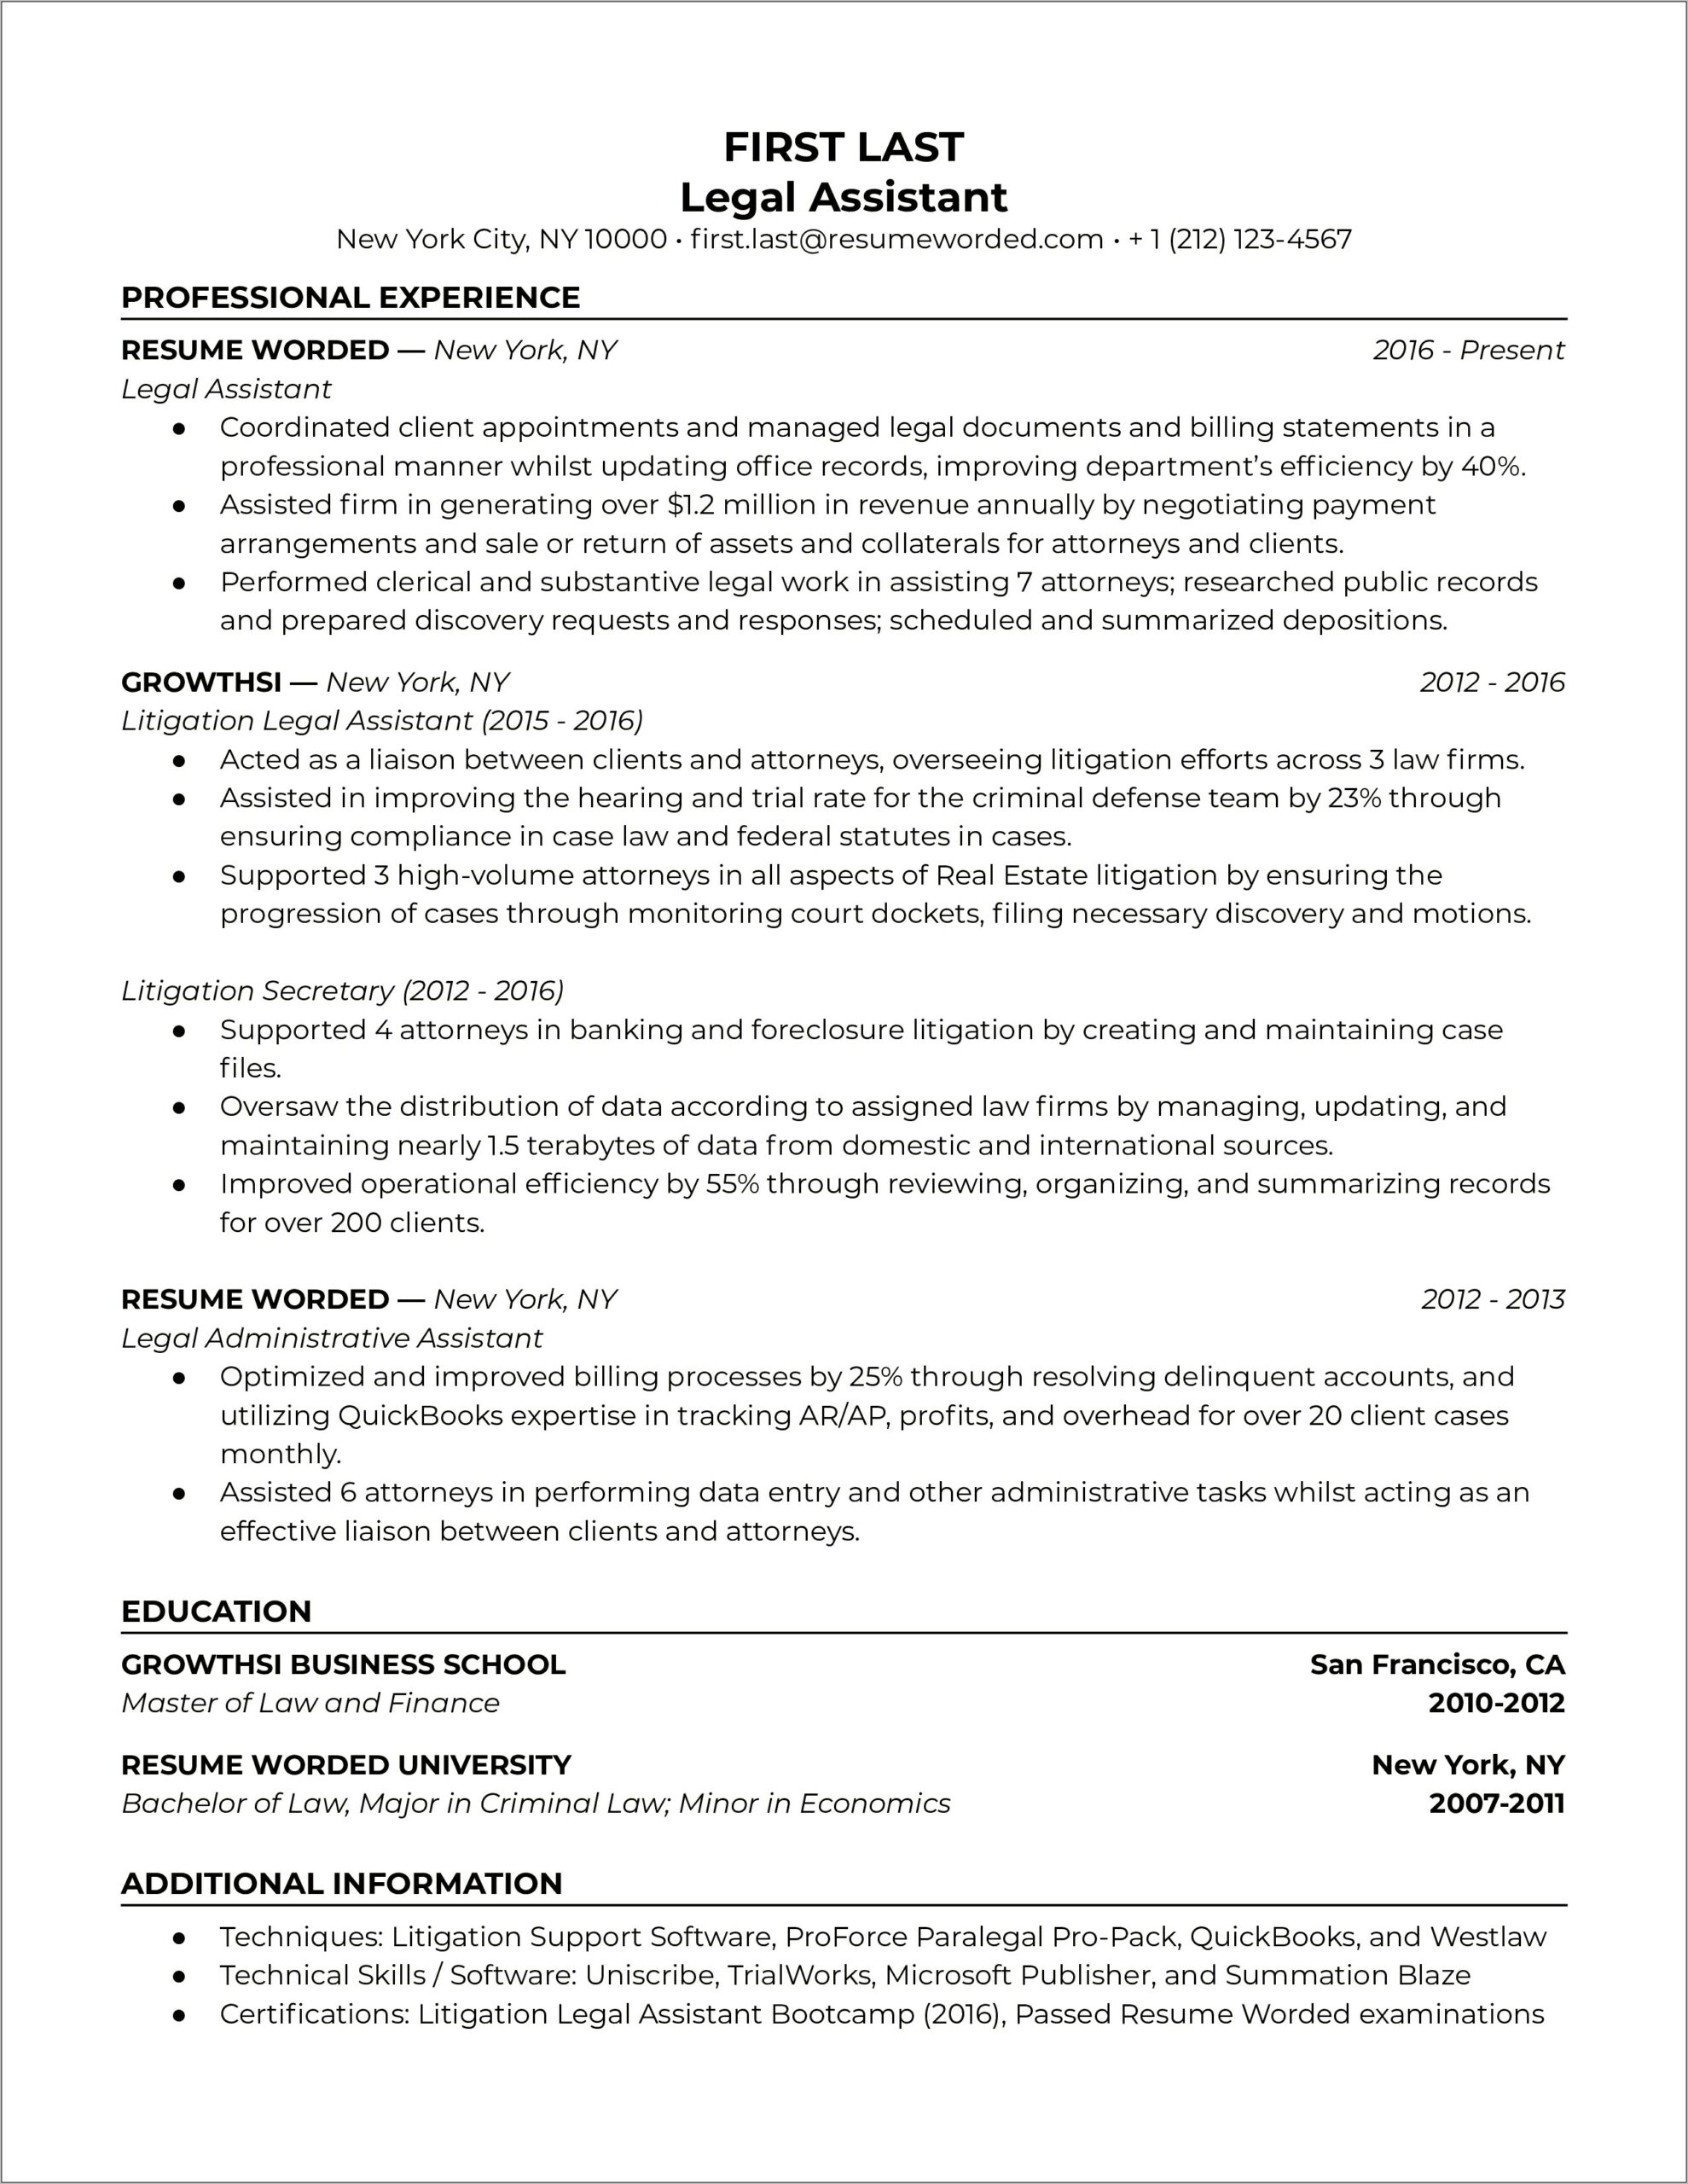 Sample Resumes For A New Paralegal